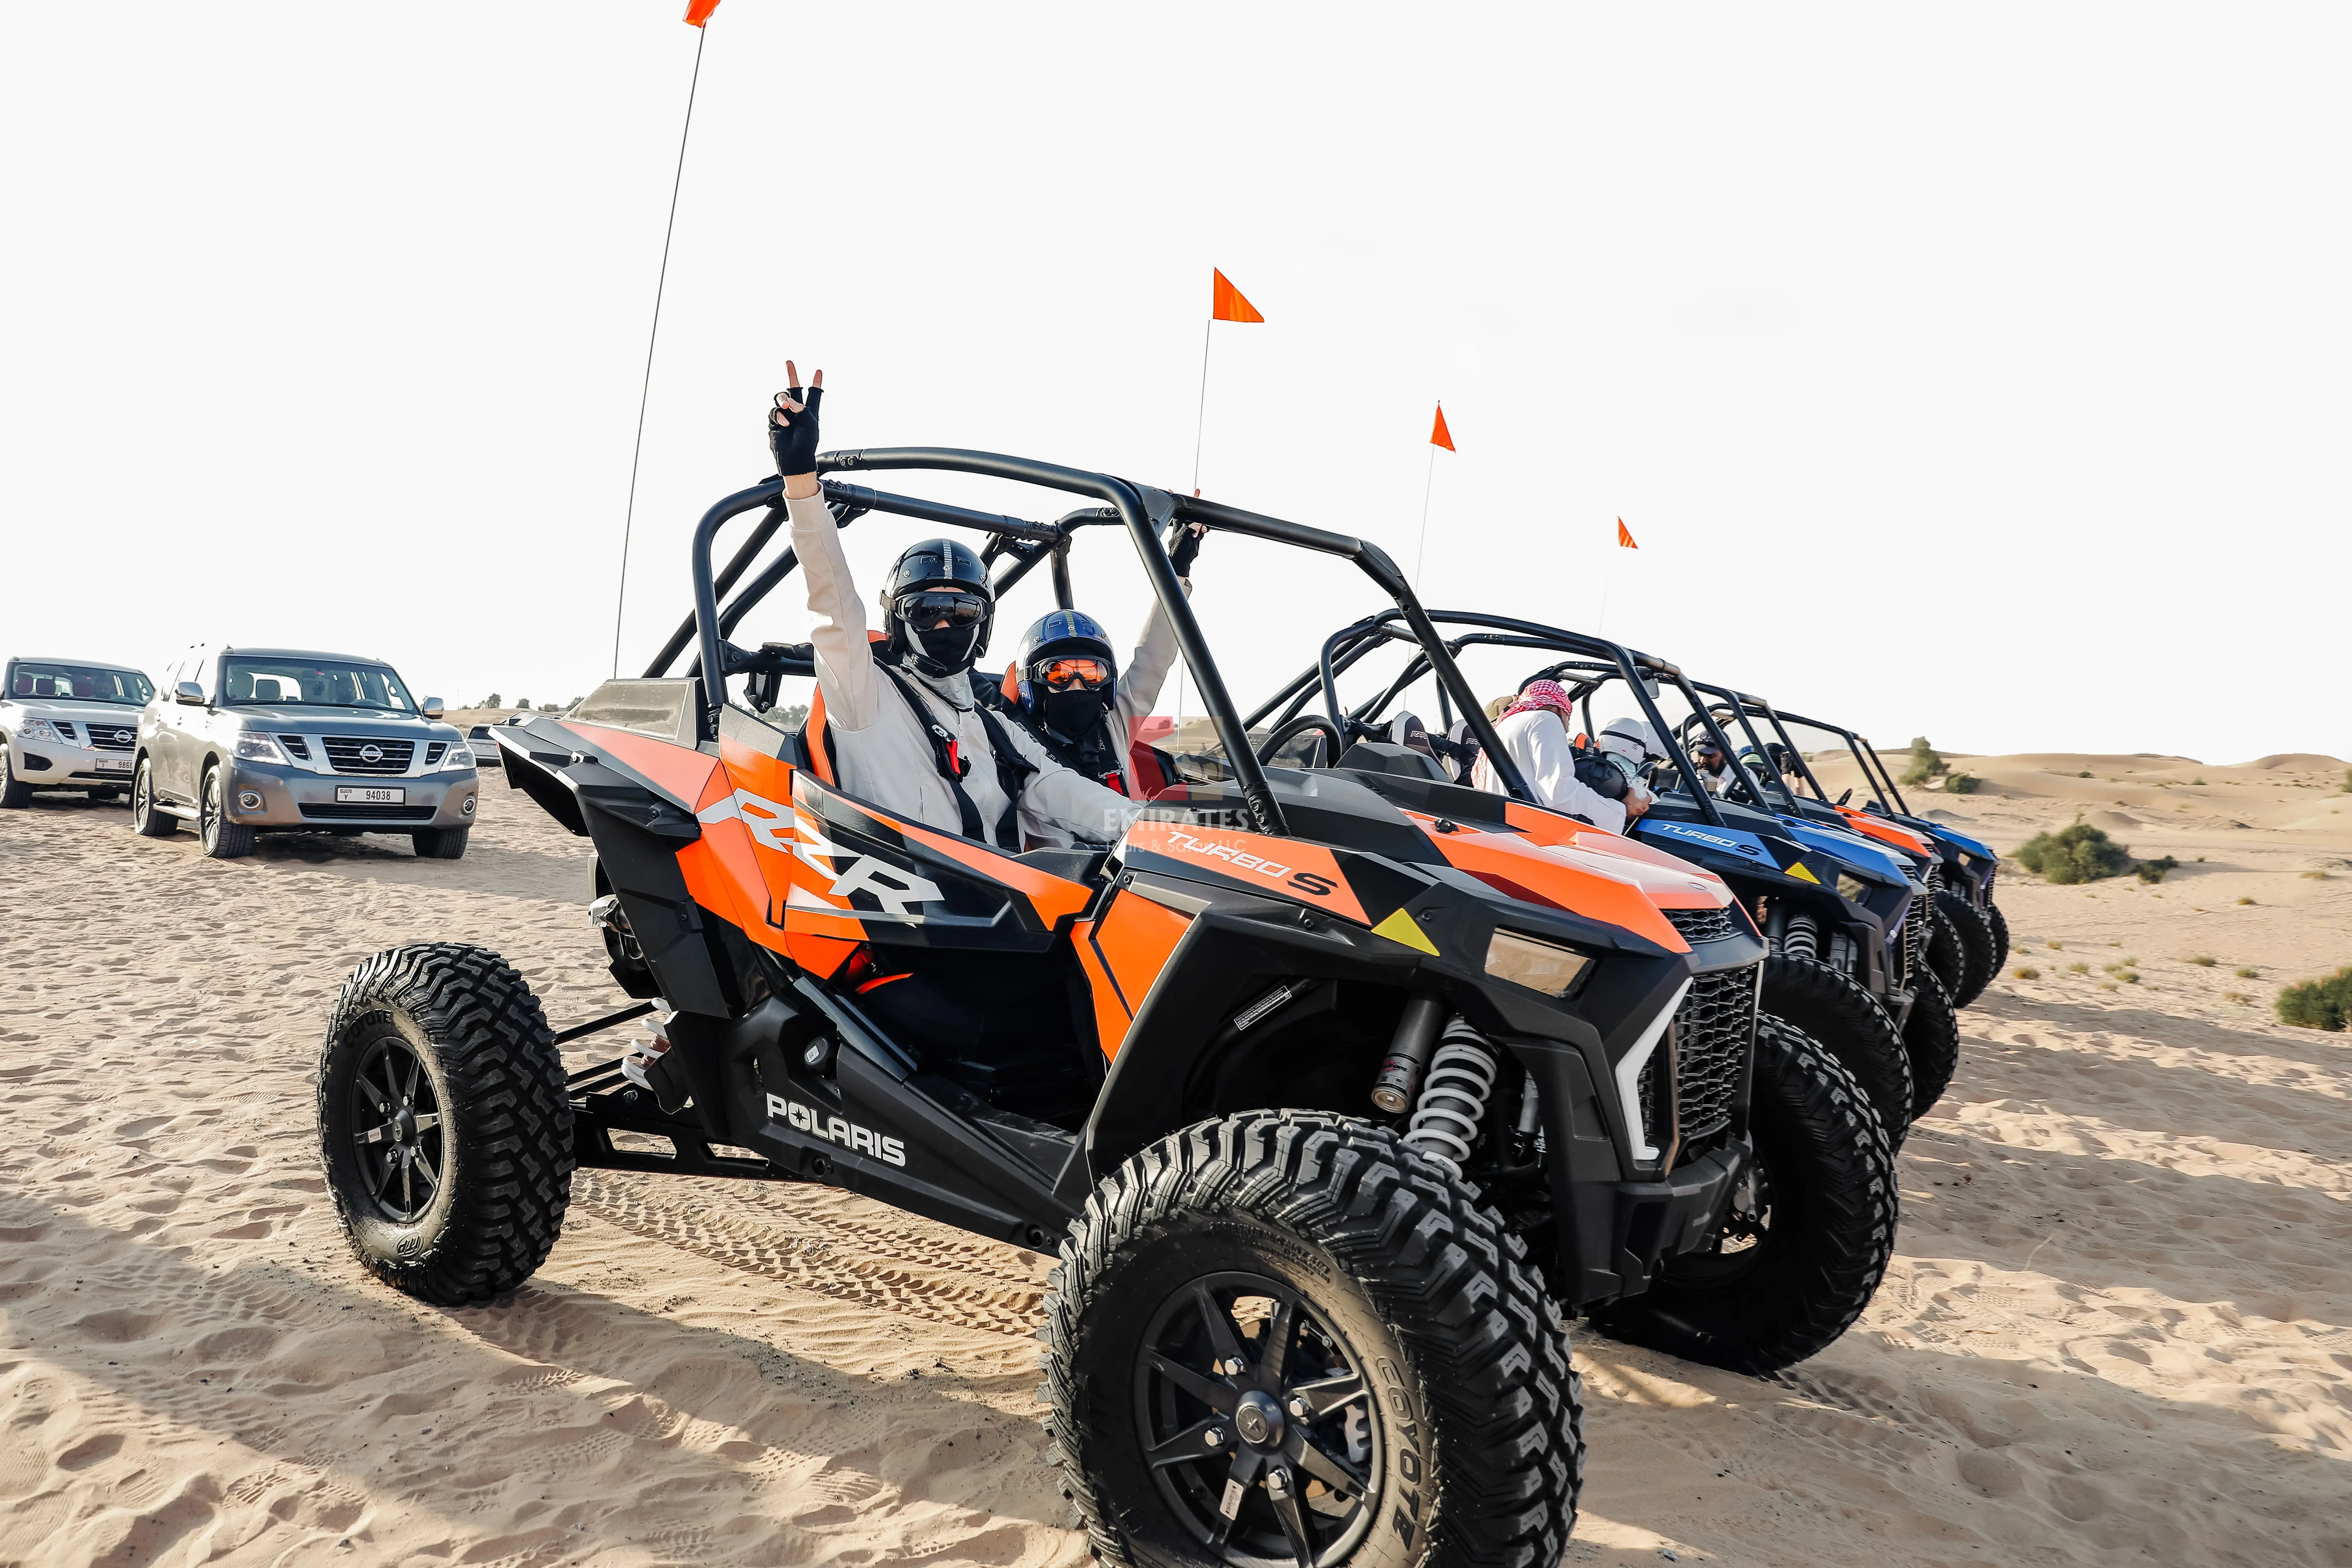 Evening Dune Buggy Adventure With BBQ Dinner & Entertainment: Four Seater 60-Minutes